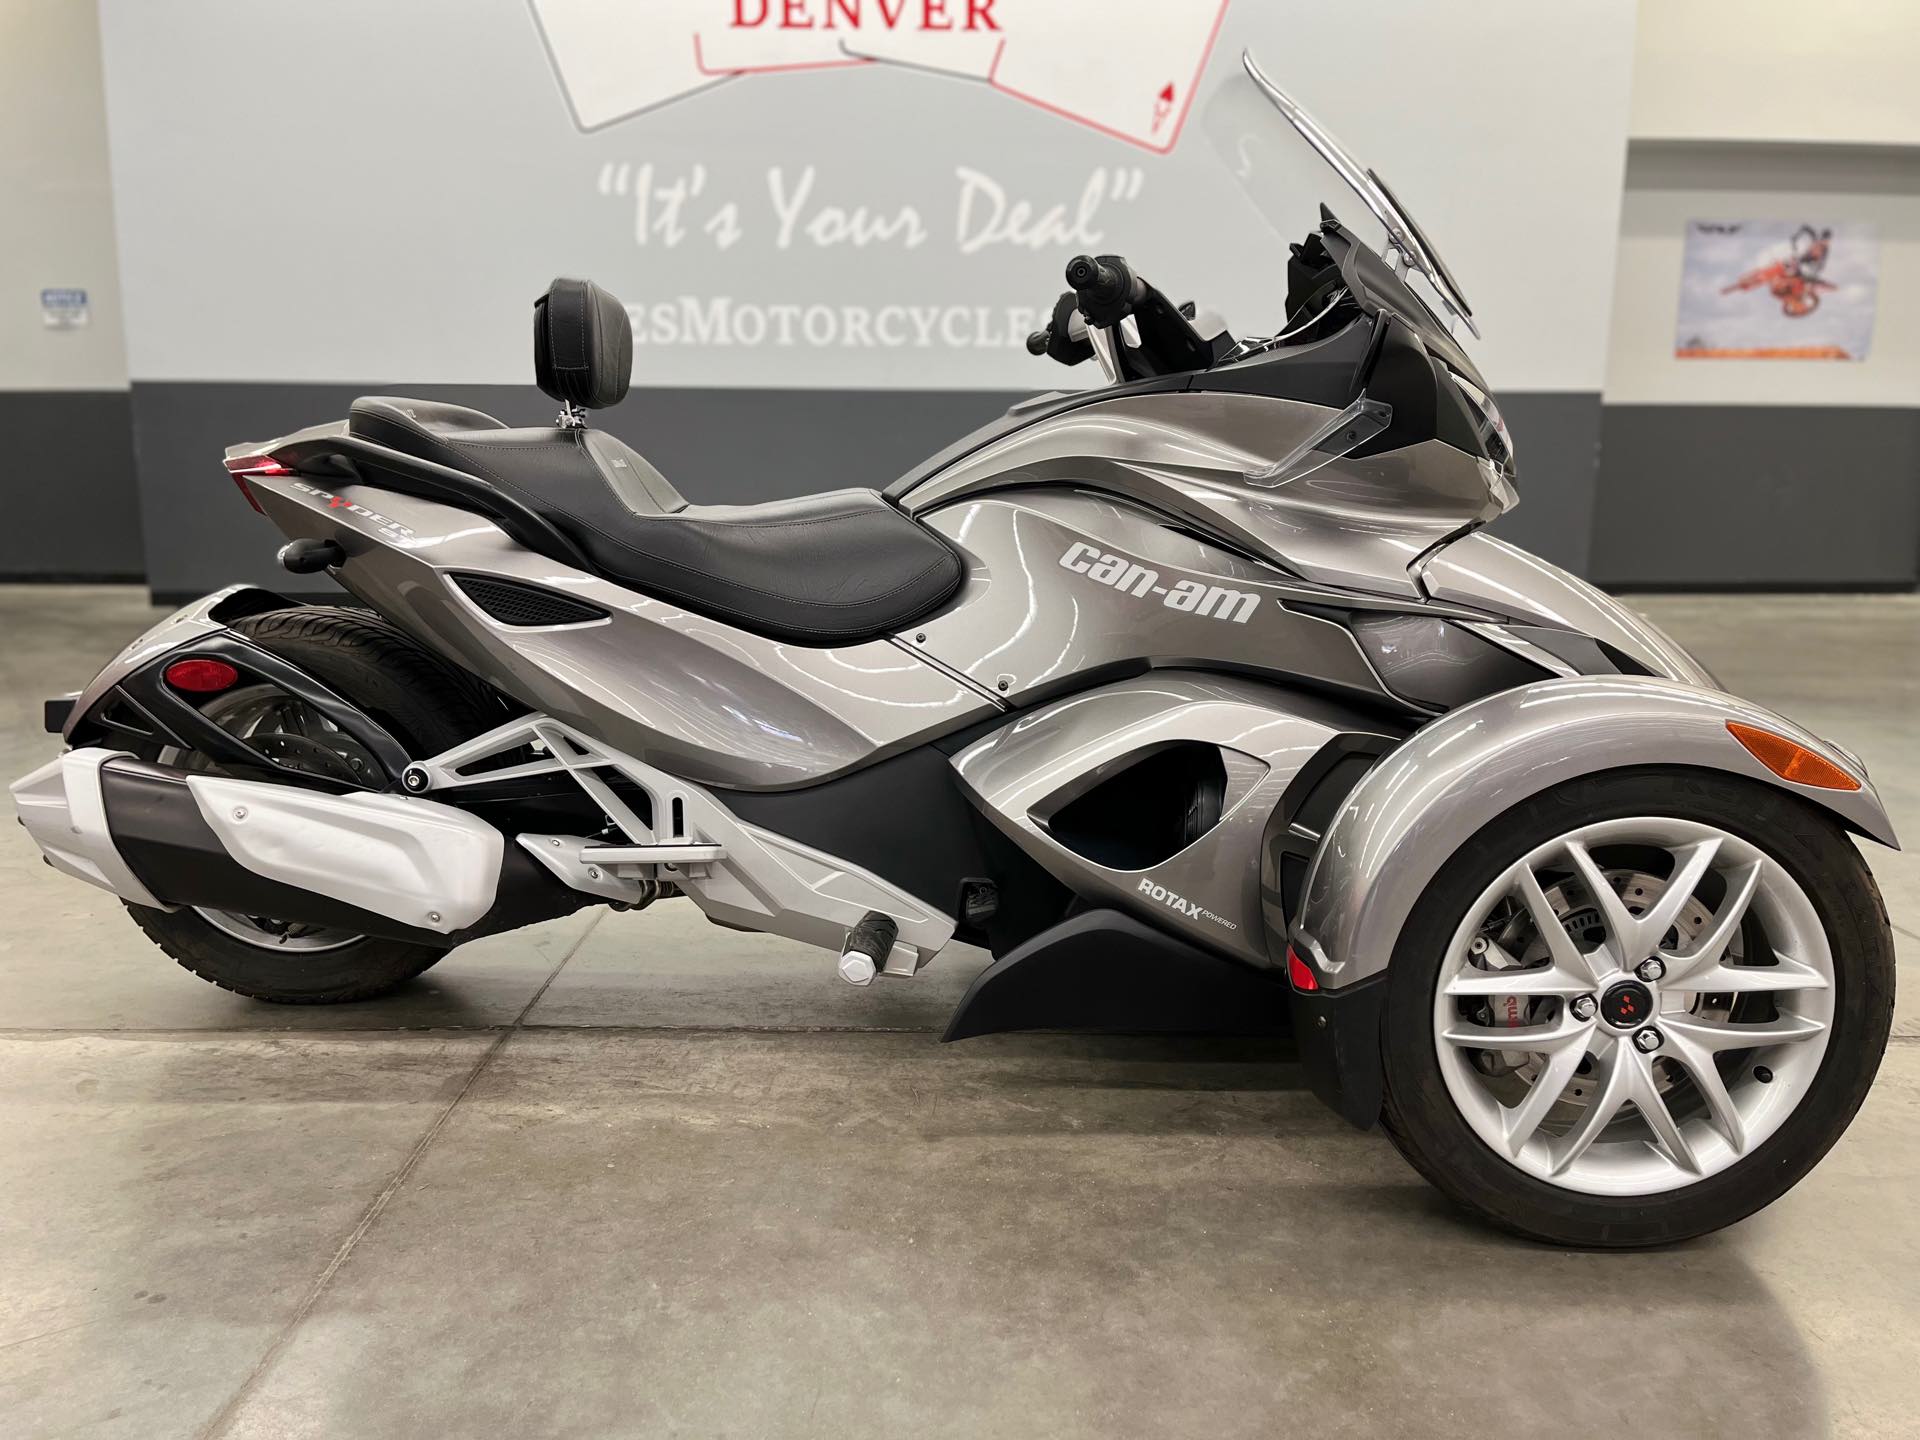 2013 Can-Am Spyder ST at Aces Motorcycles - Denver